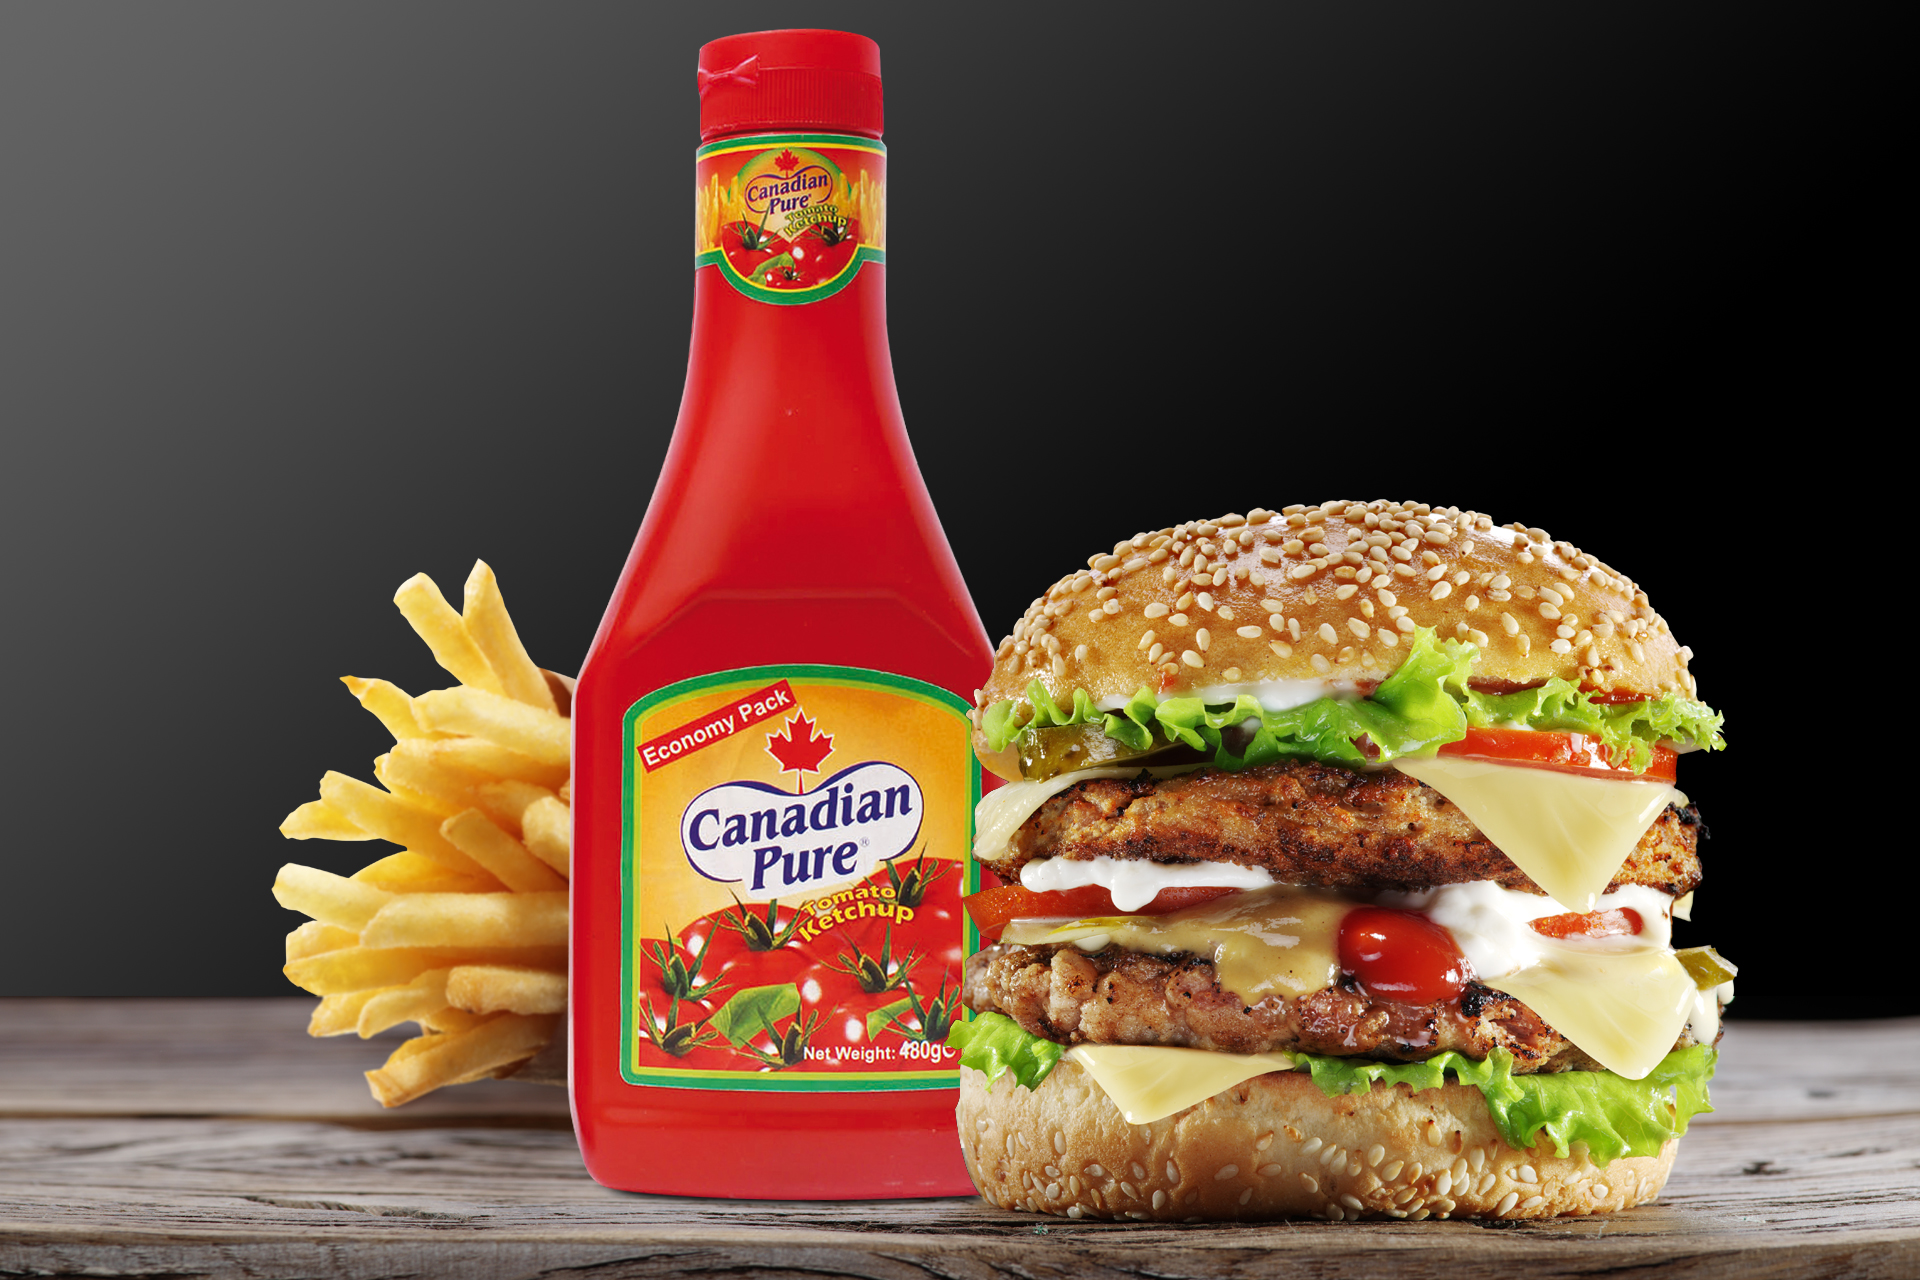 https://orbitsarl.com/wp-content/uploads/2017/09/Product-Food_CanadianPure-Ketchup-480g_1920x1280-FIN.jpg